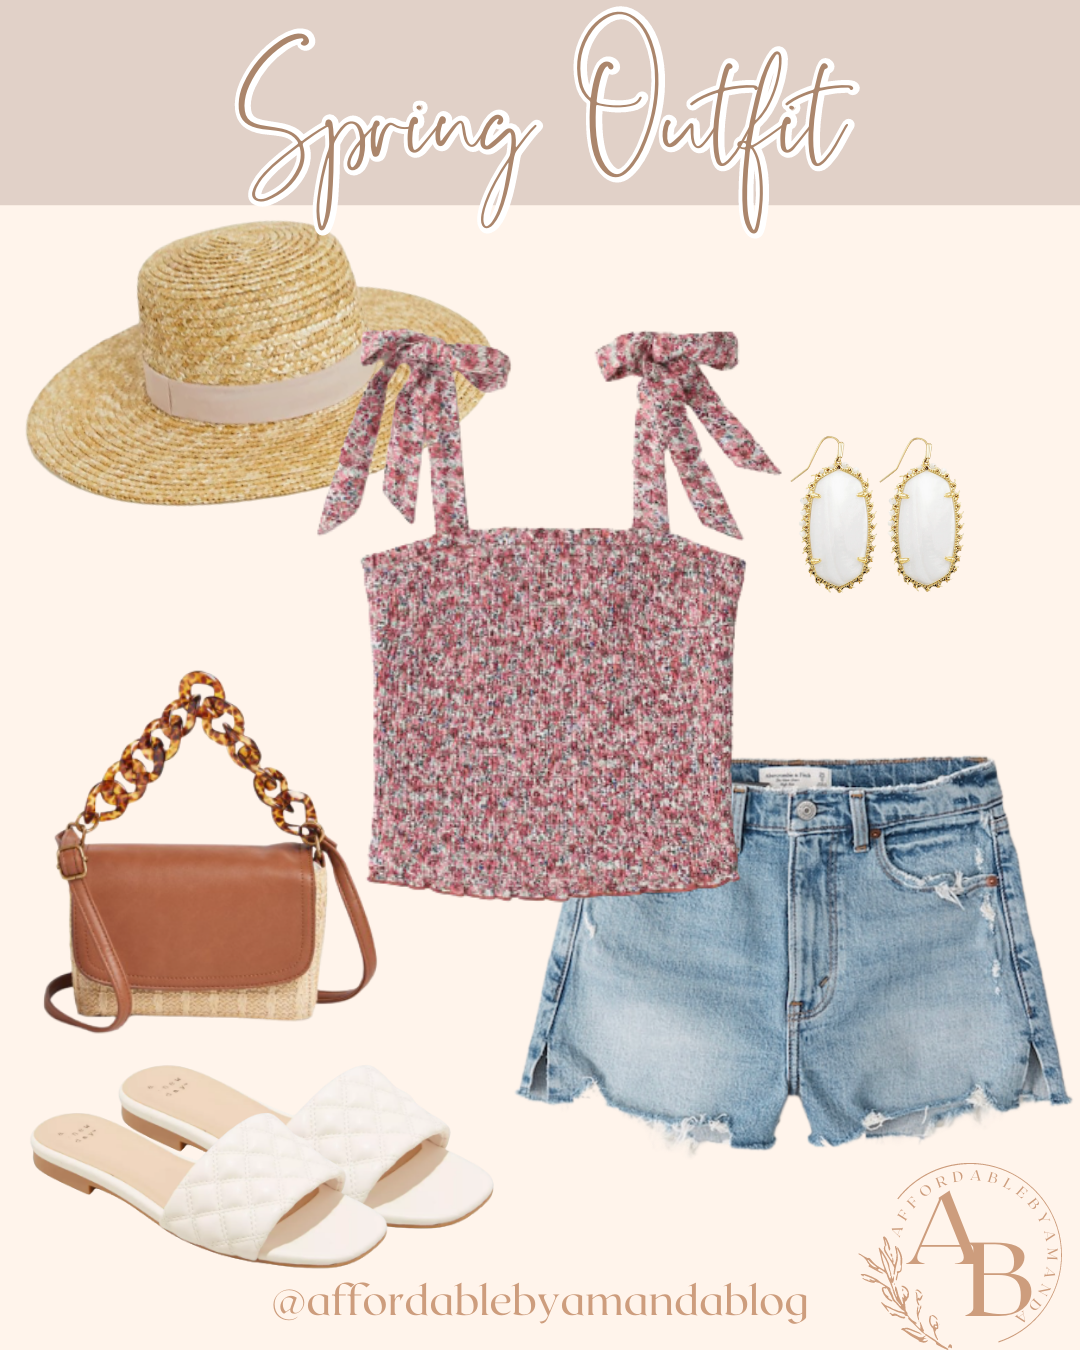 Cute Spring Outfit Idea 2021 | Affordable by Amanda